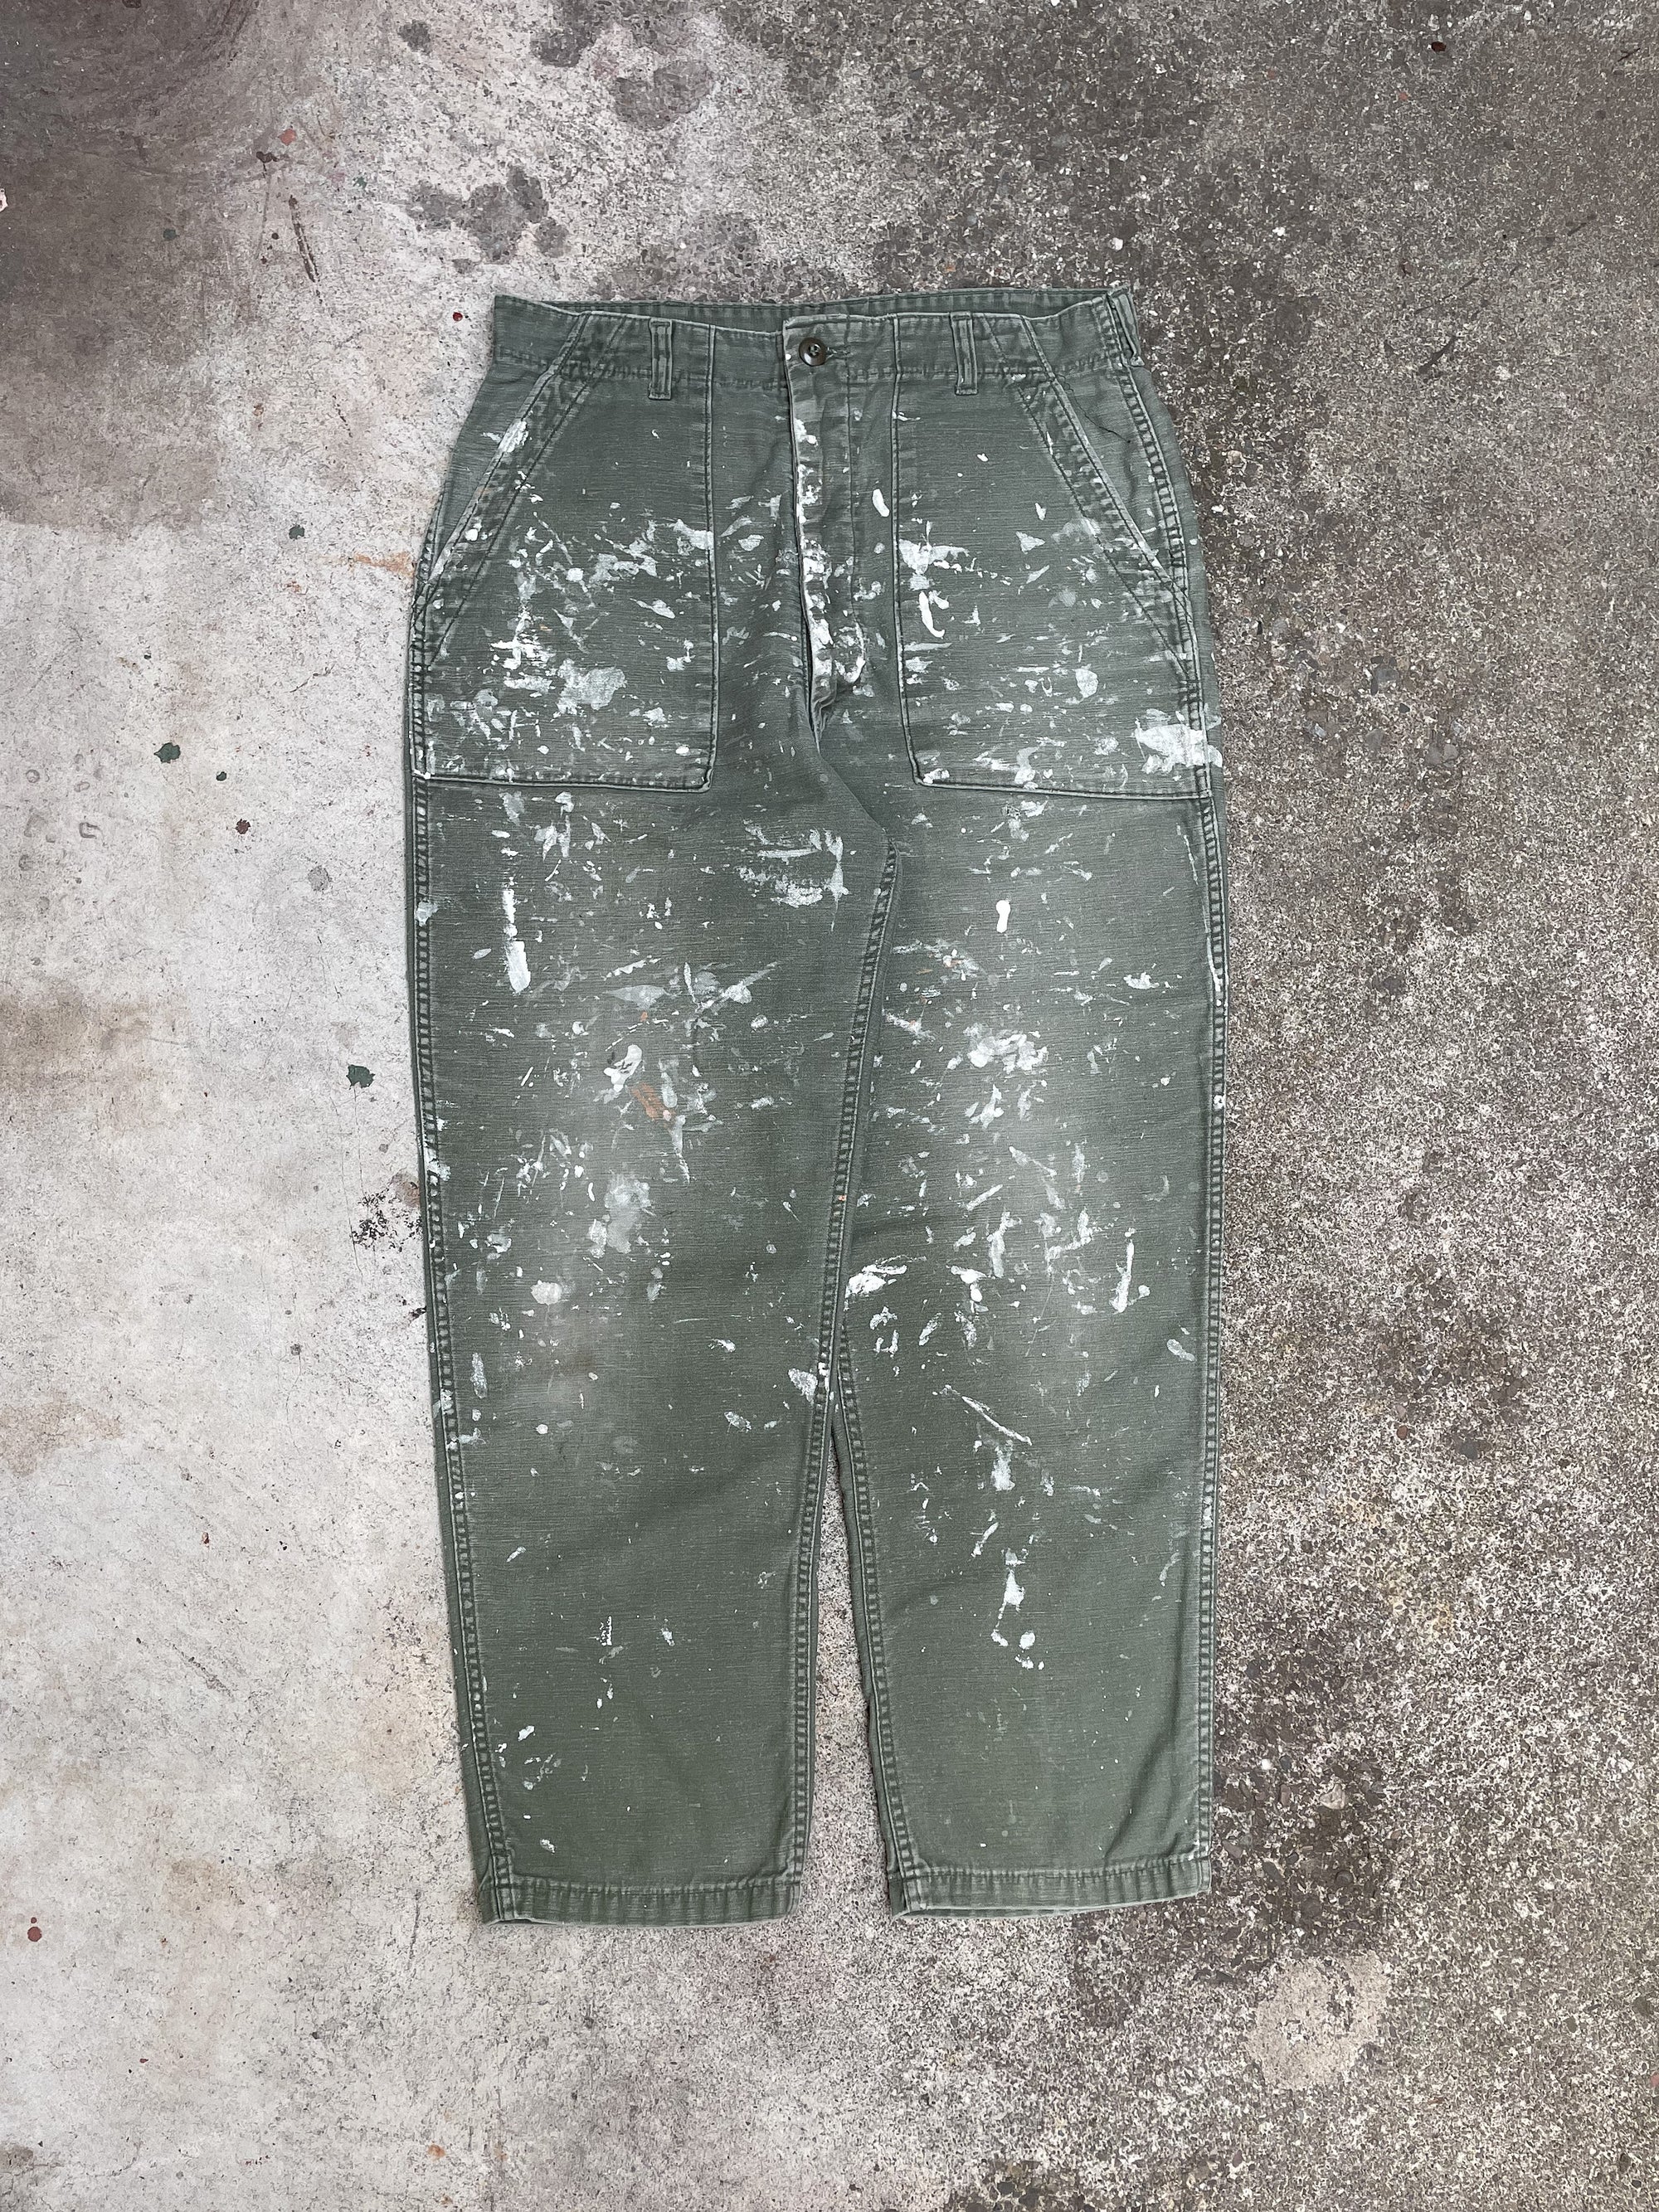 1960s Painted Faded OG-107 Military Pants (32X28)